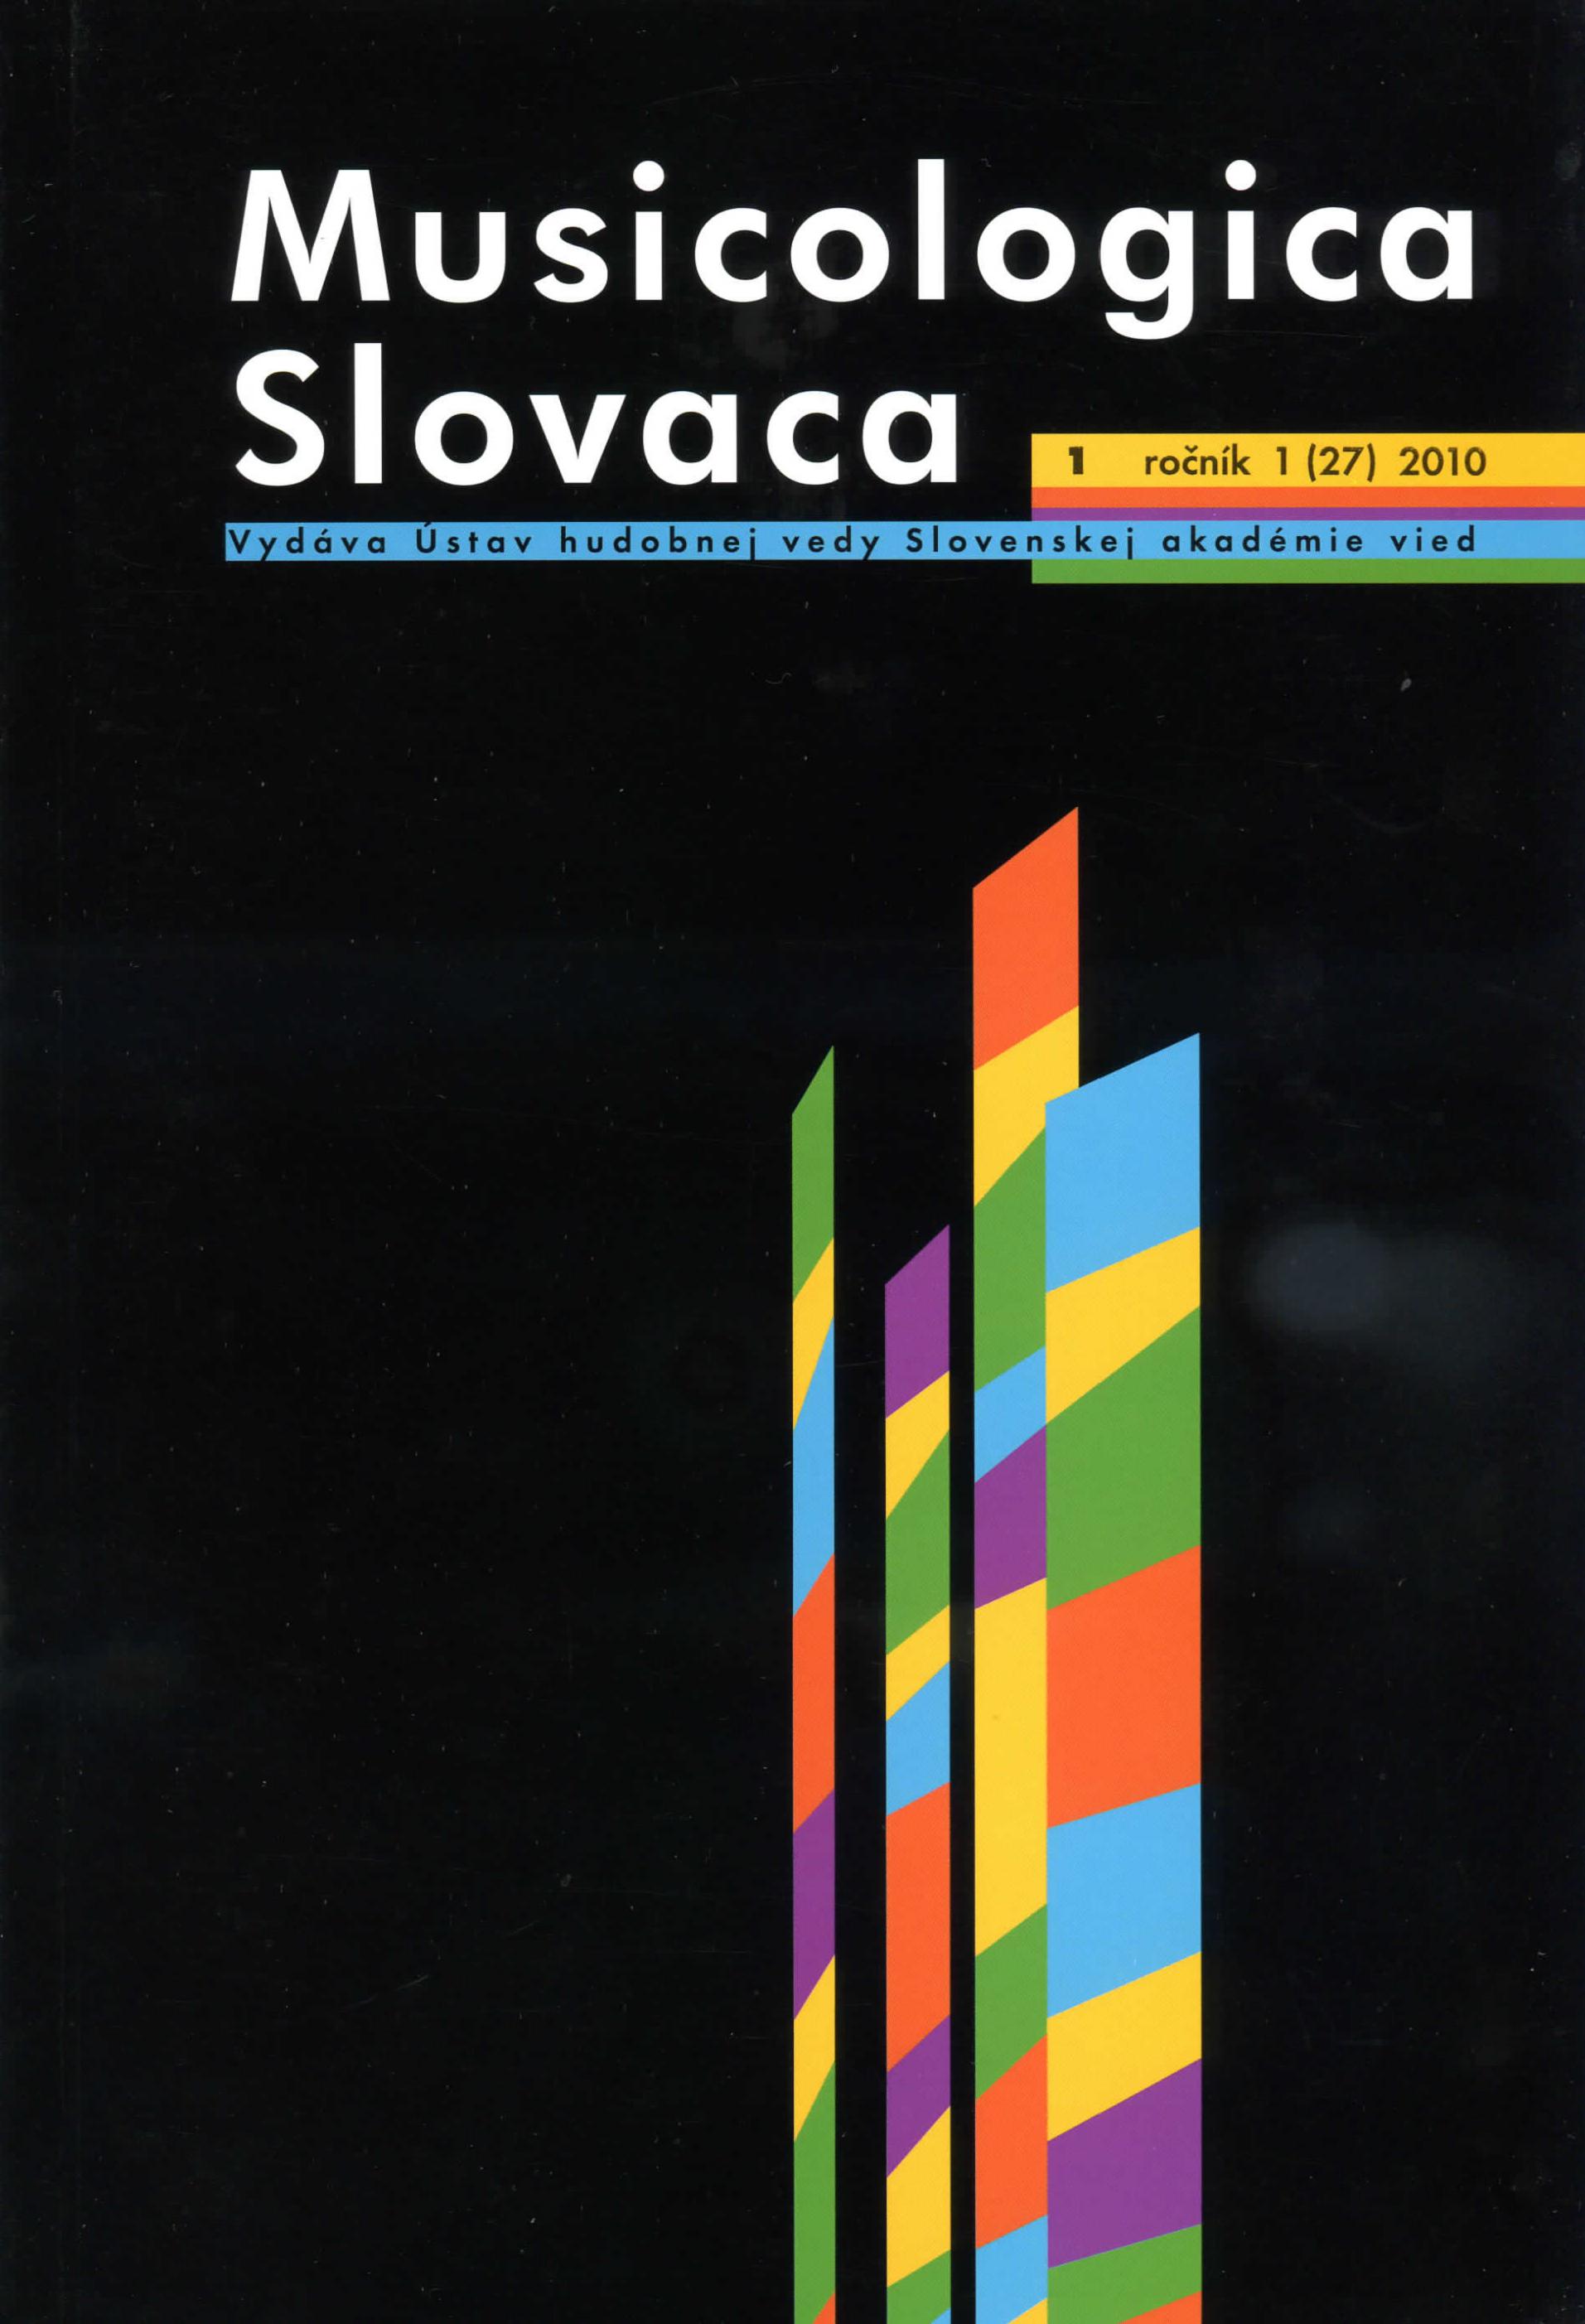 Midsummer Songs in Slovakia as Part of Slavonic Cultural Tradition Cover Image